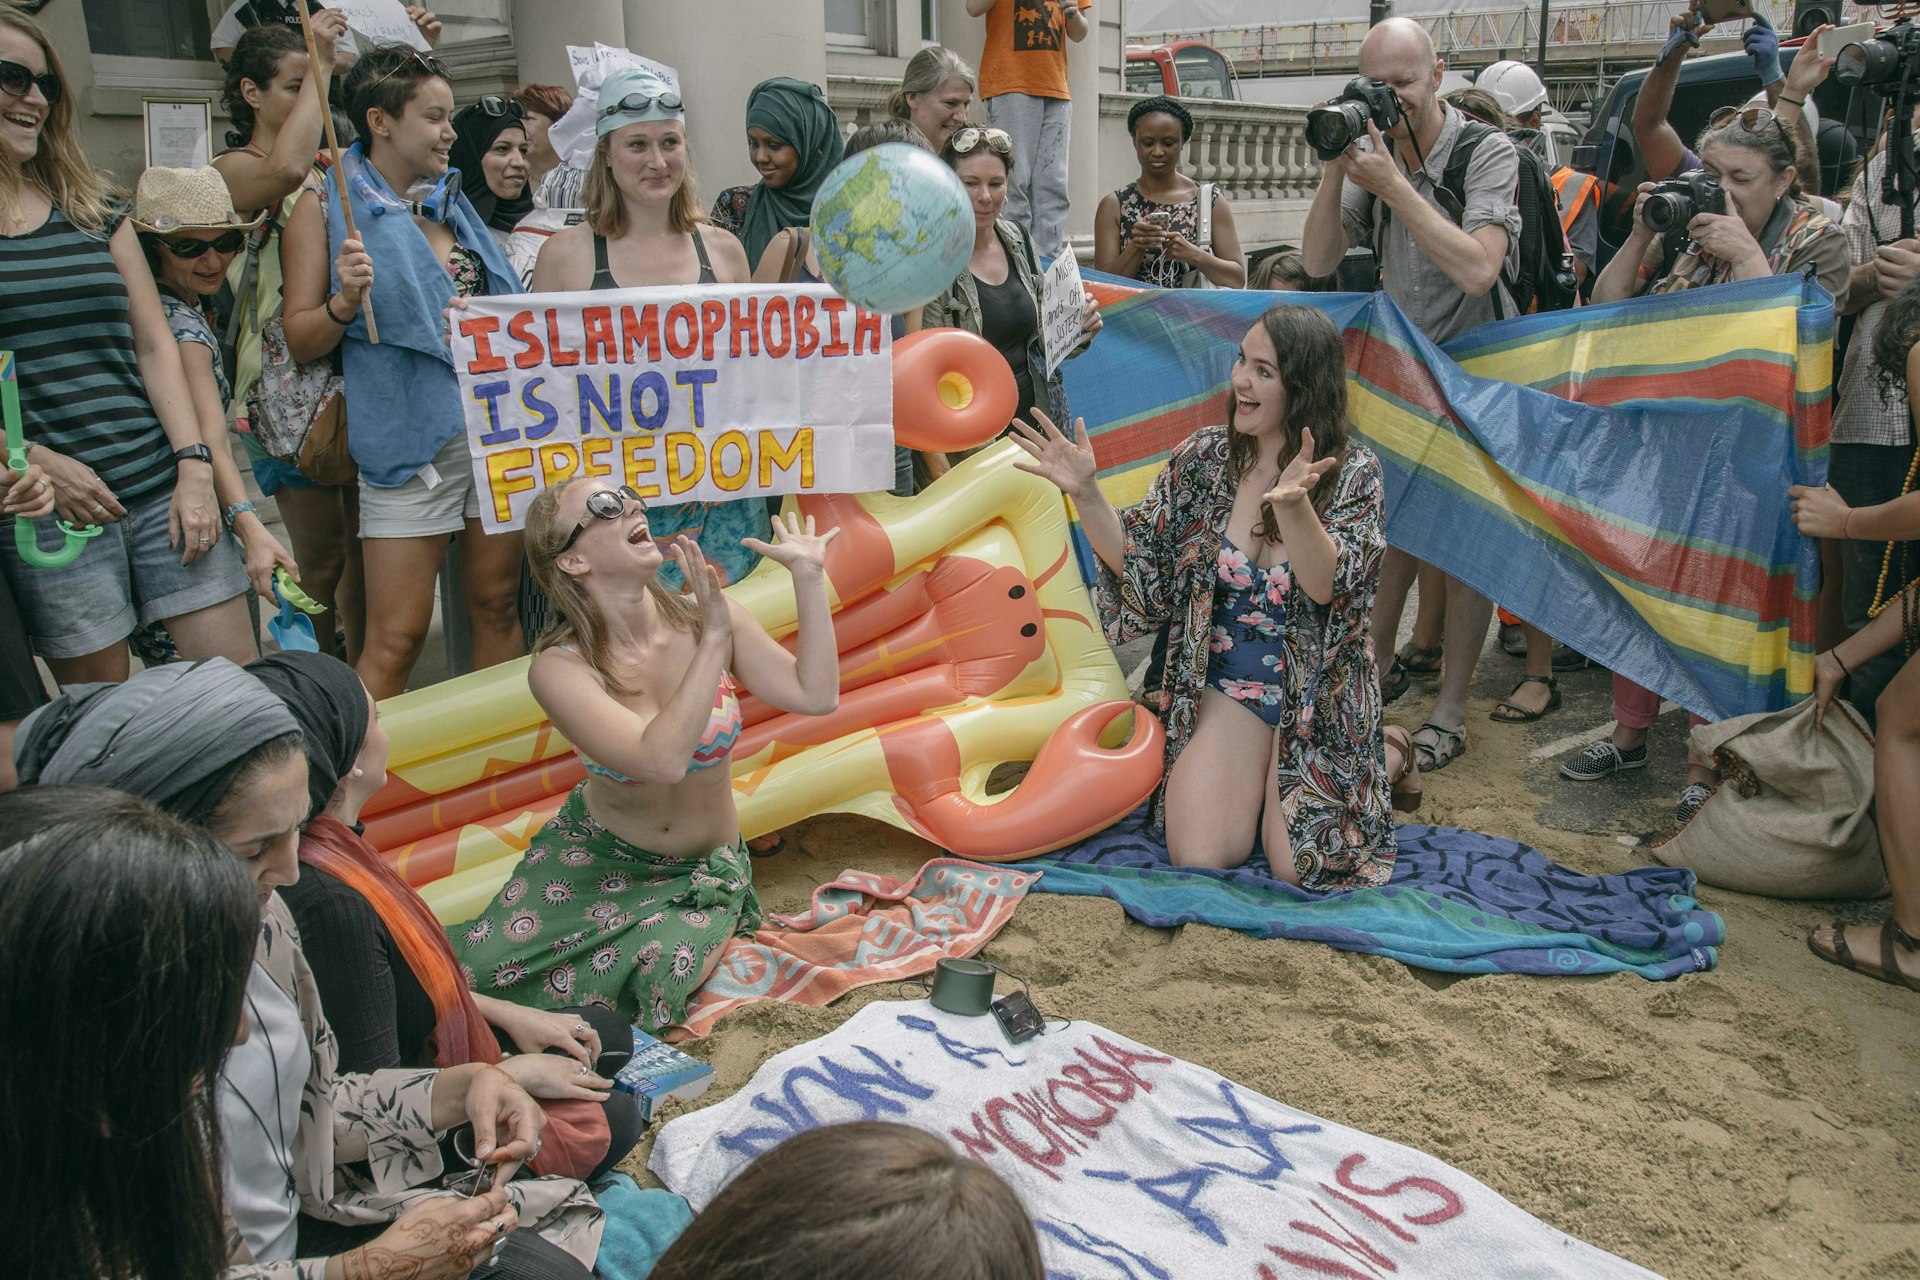 #WearWhatYouWant: Protest in London over French burkini ban